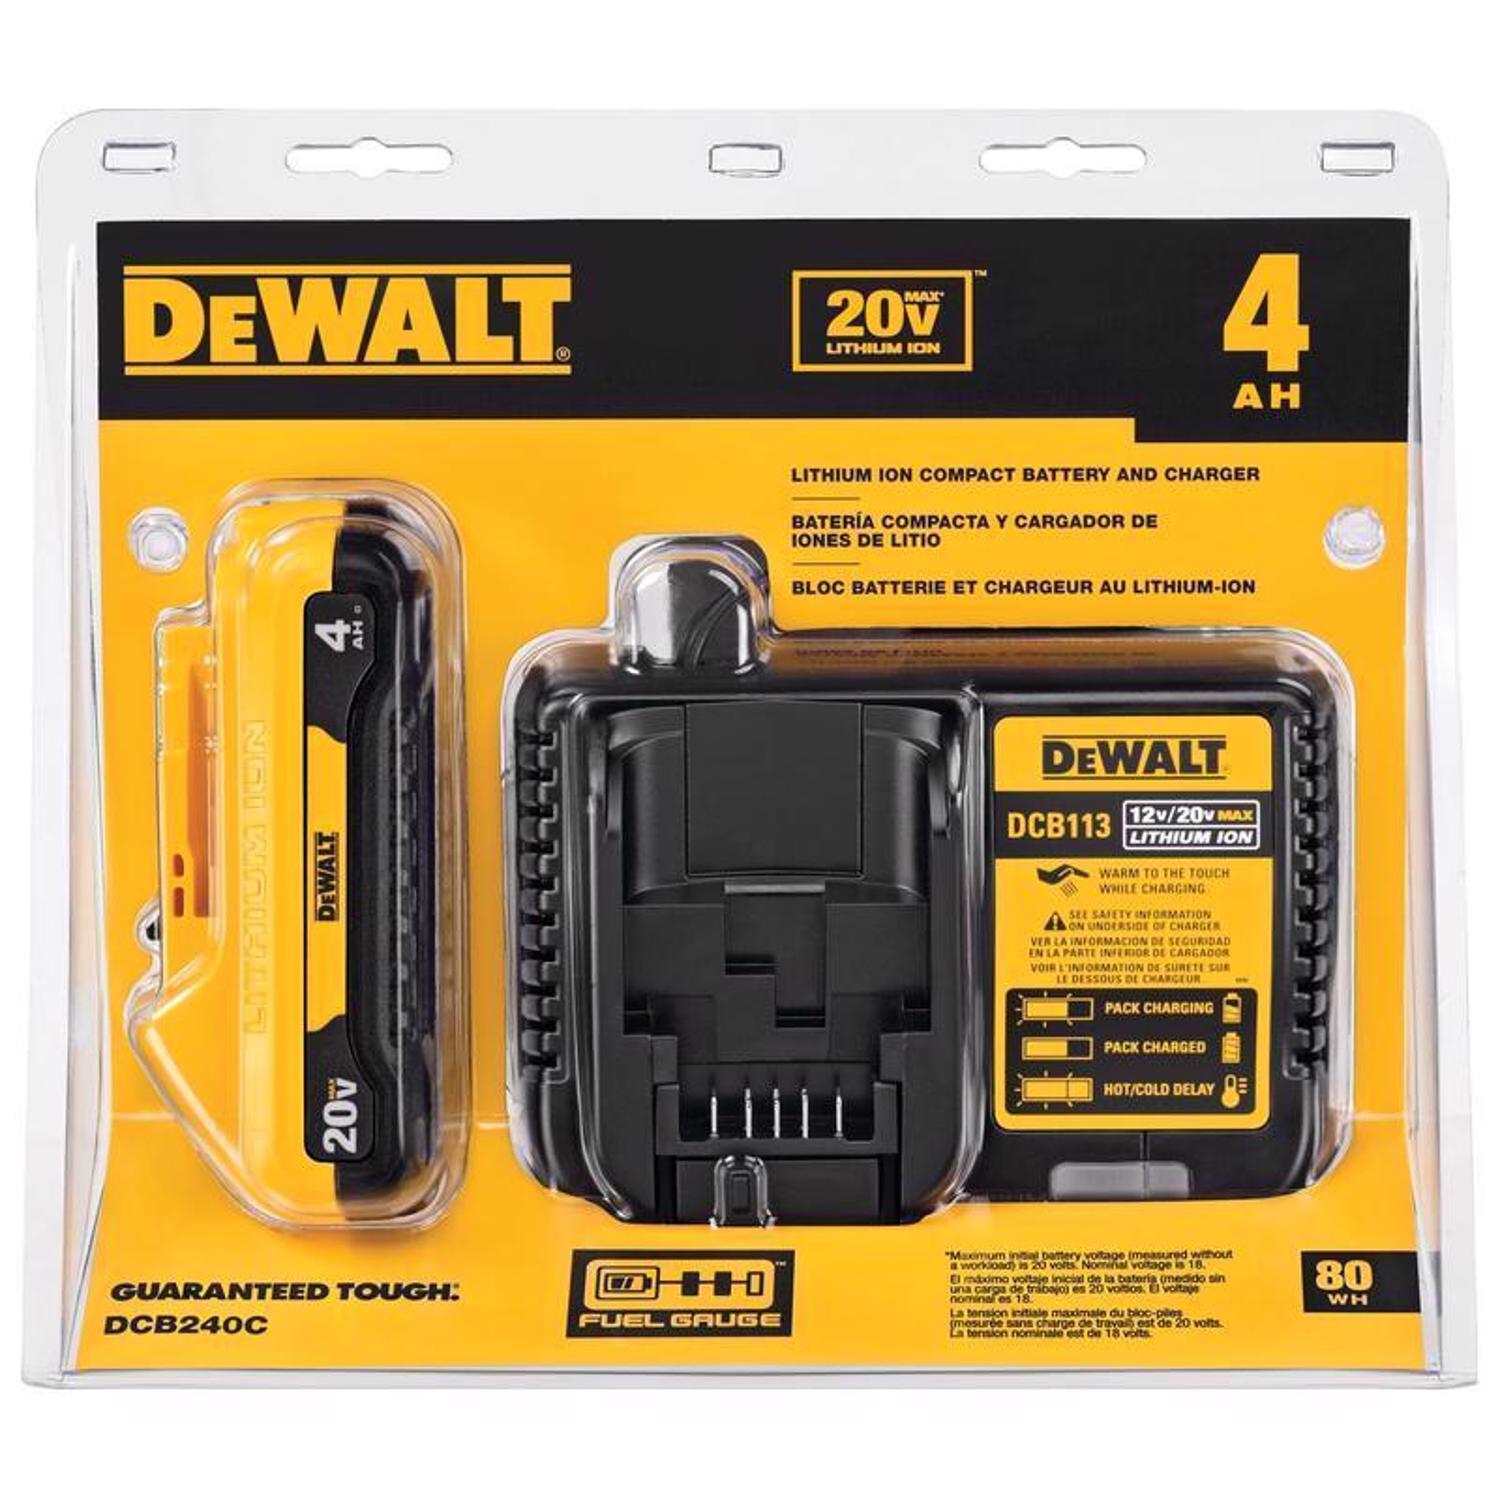 Photos - Power Tool Battery DeWALT 20V MAX DCB240C 4 Ah Lithium-Ion Compact Battery and Charger Starte 